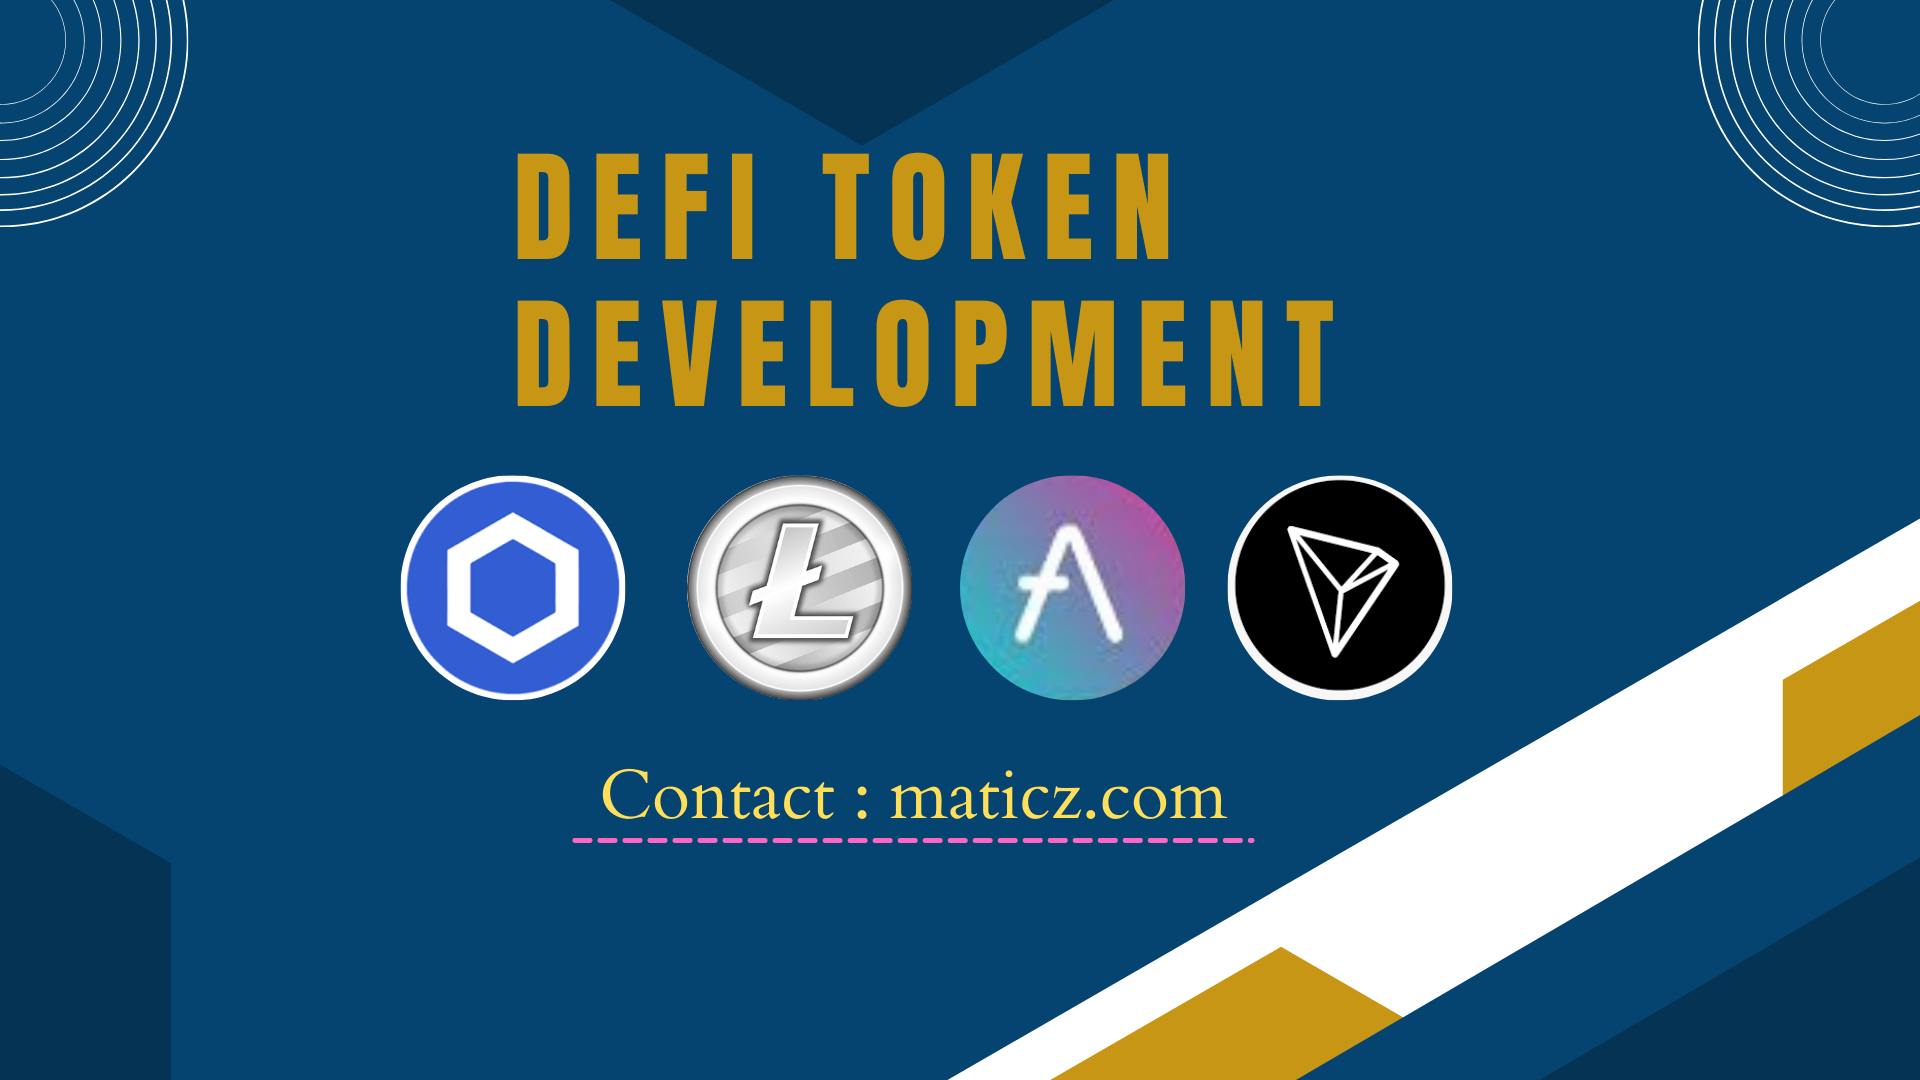 Article about Upgrade your enterprise with Defi Token Development services